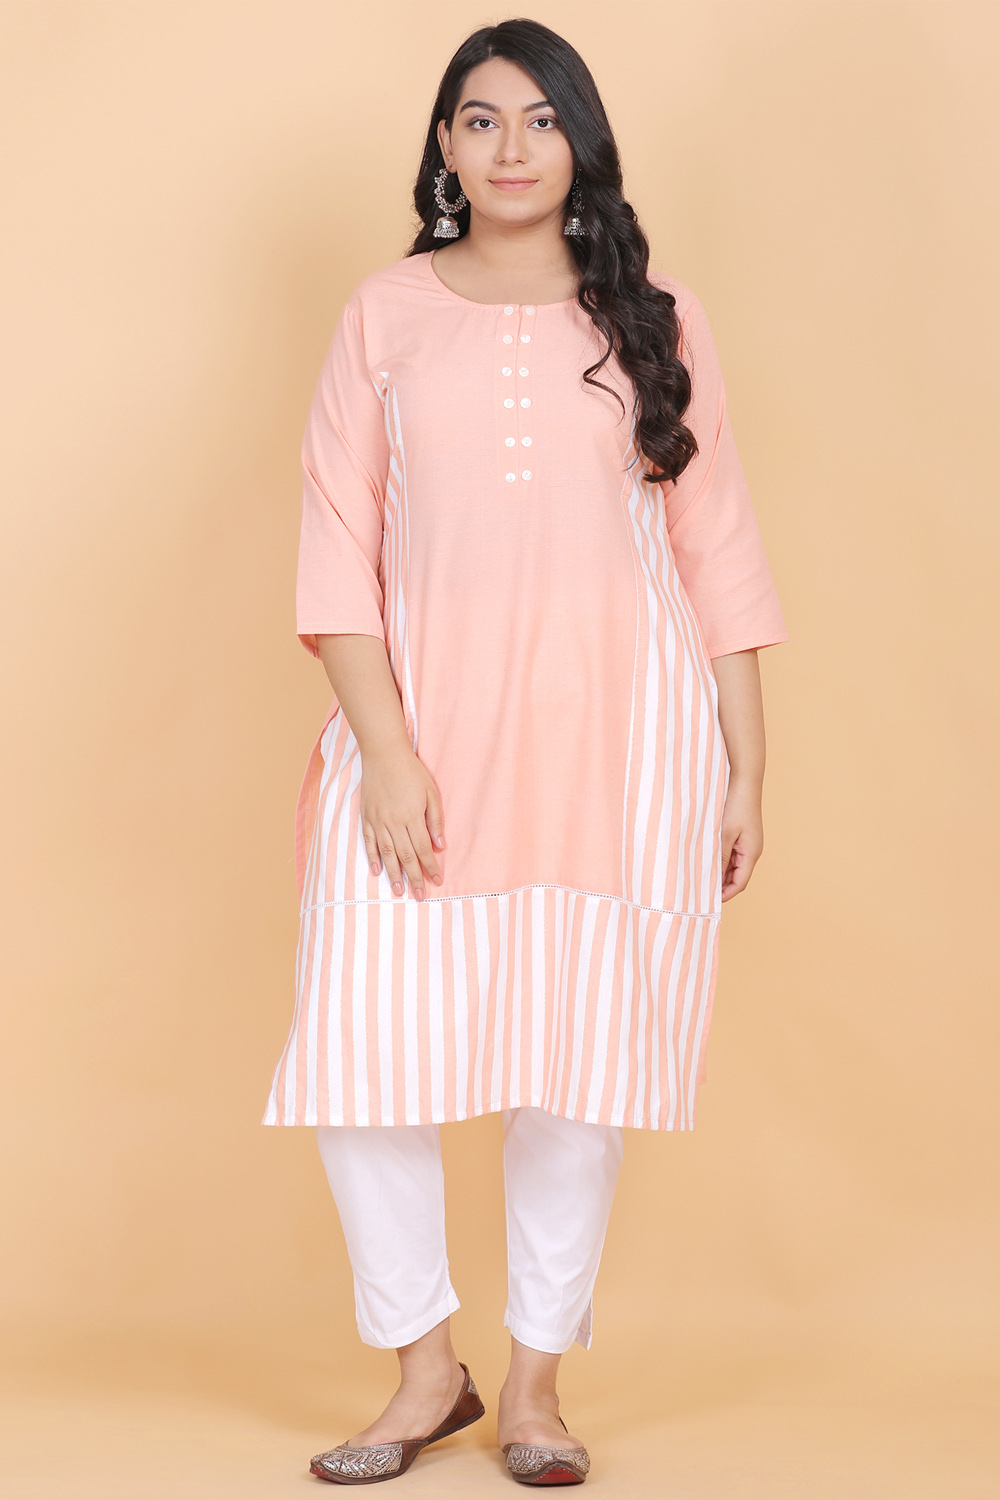 Buy latest indo western kurtis designs for women online uk usa canada  #Fashionable #Attractive #Trendy #… | Kurti designs, Kurta designs, Womens  clothing patterns